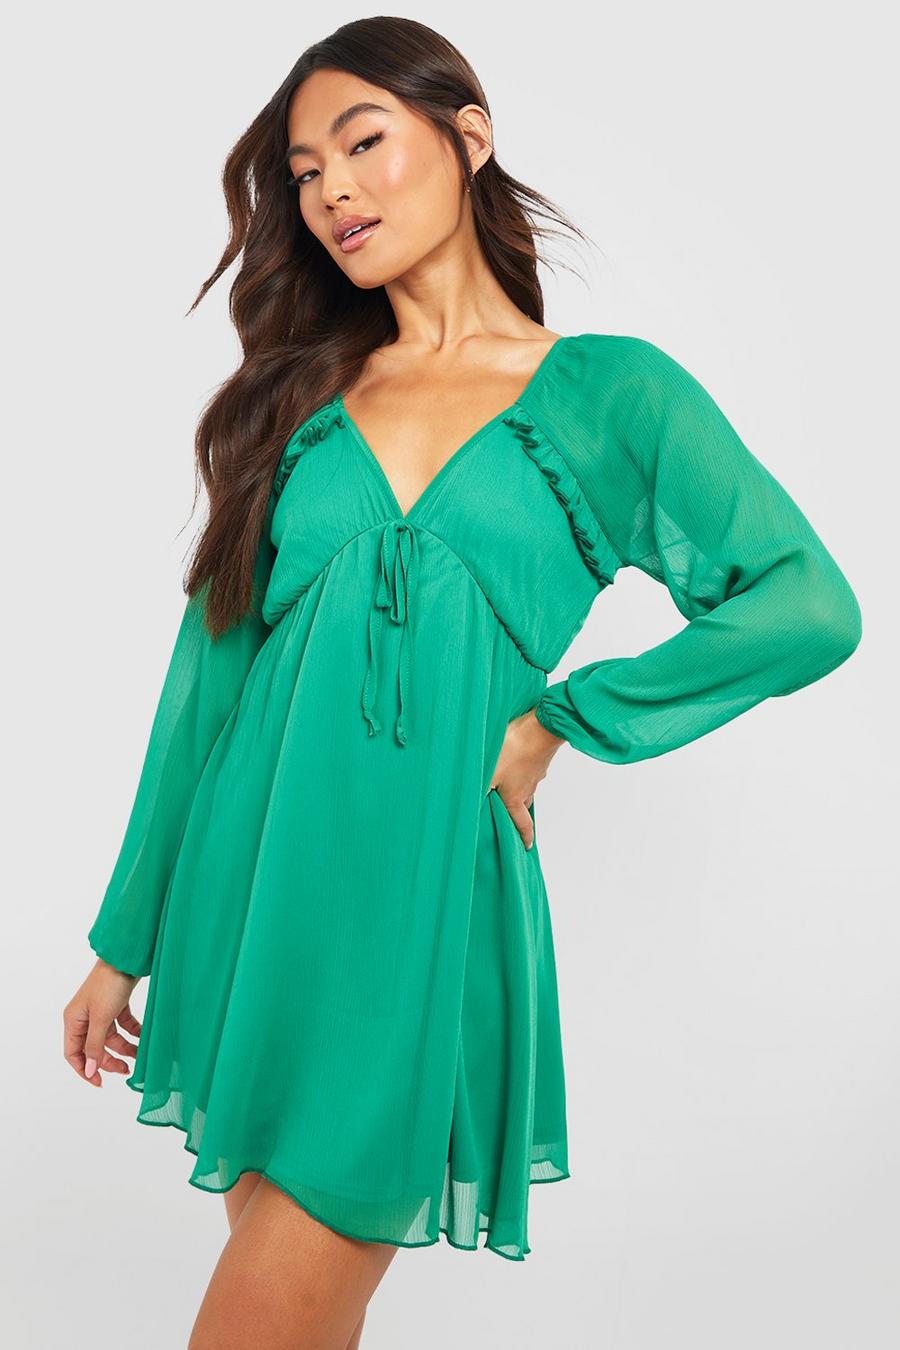 Robe patineuse nouée, Bright green